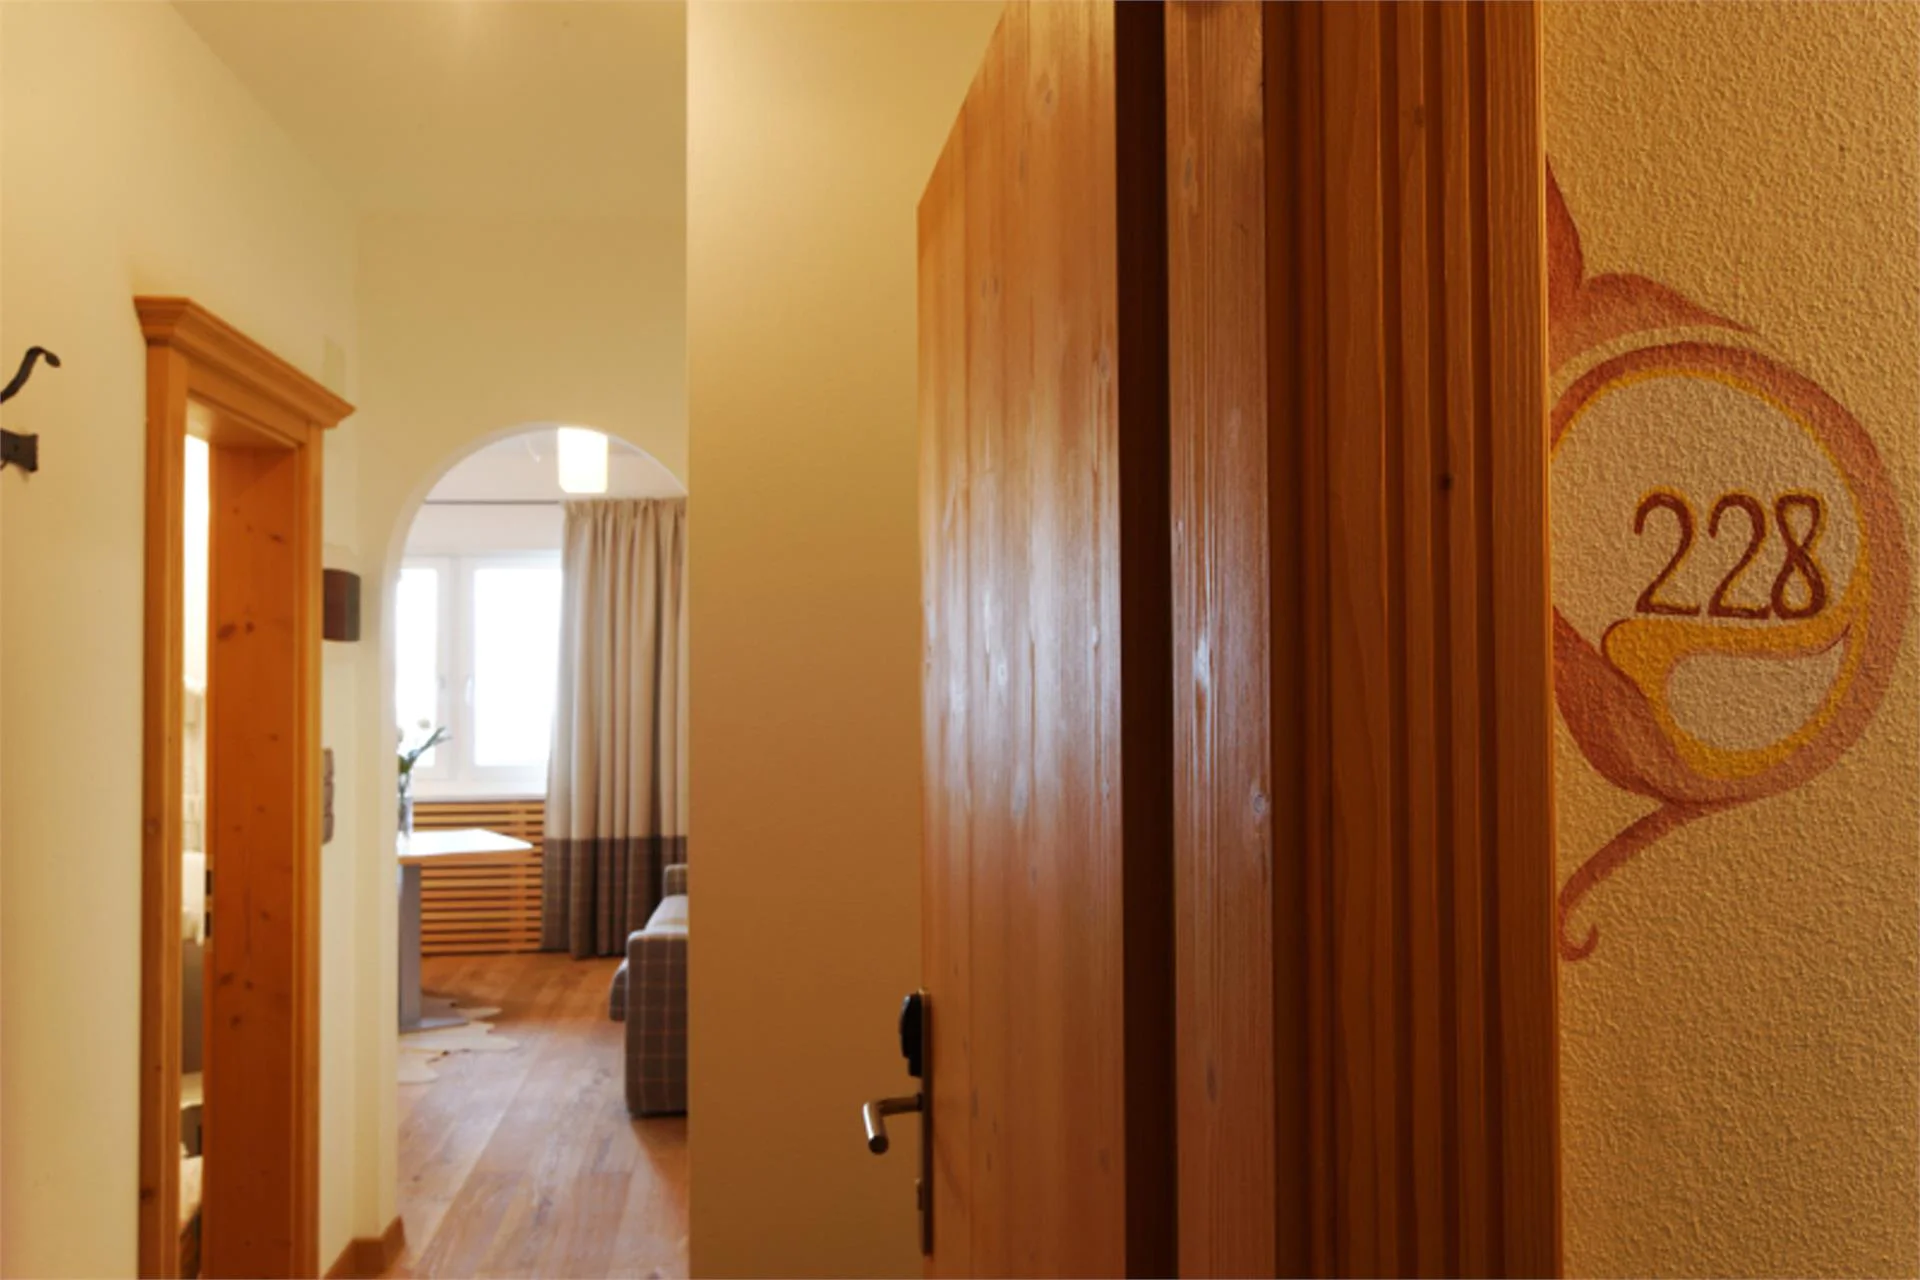 Residence Hotel Alpinum Sand in Taufers/Campo Tures 5 suedtirol.info